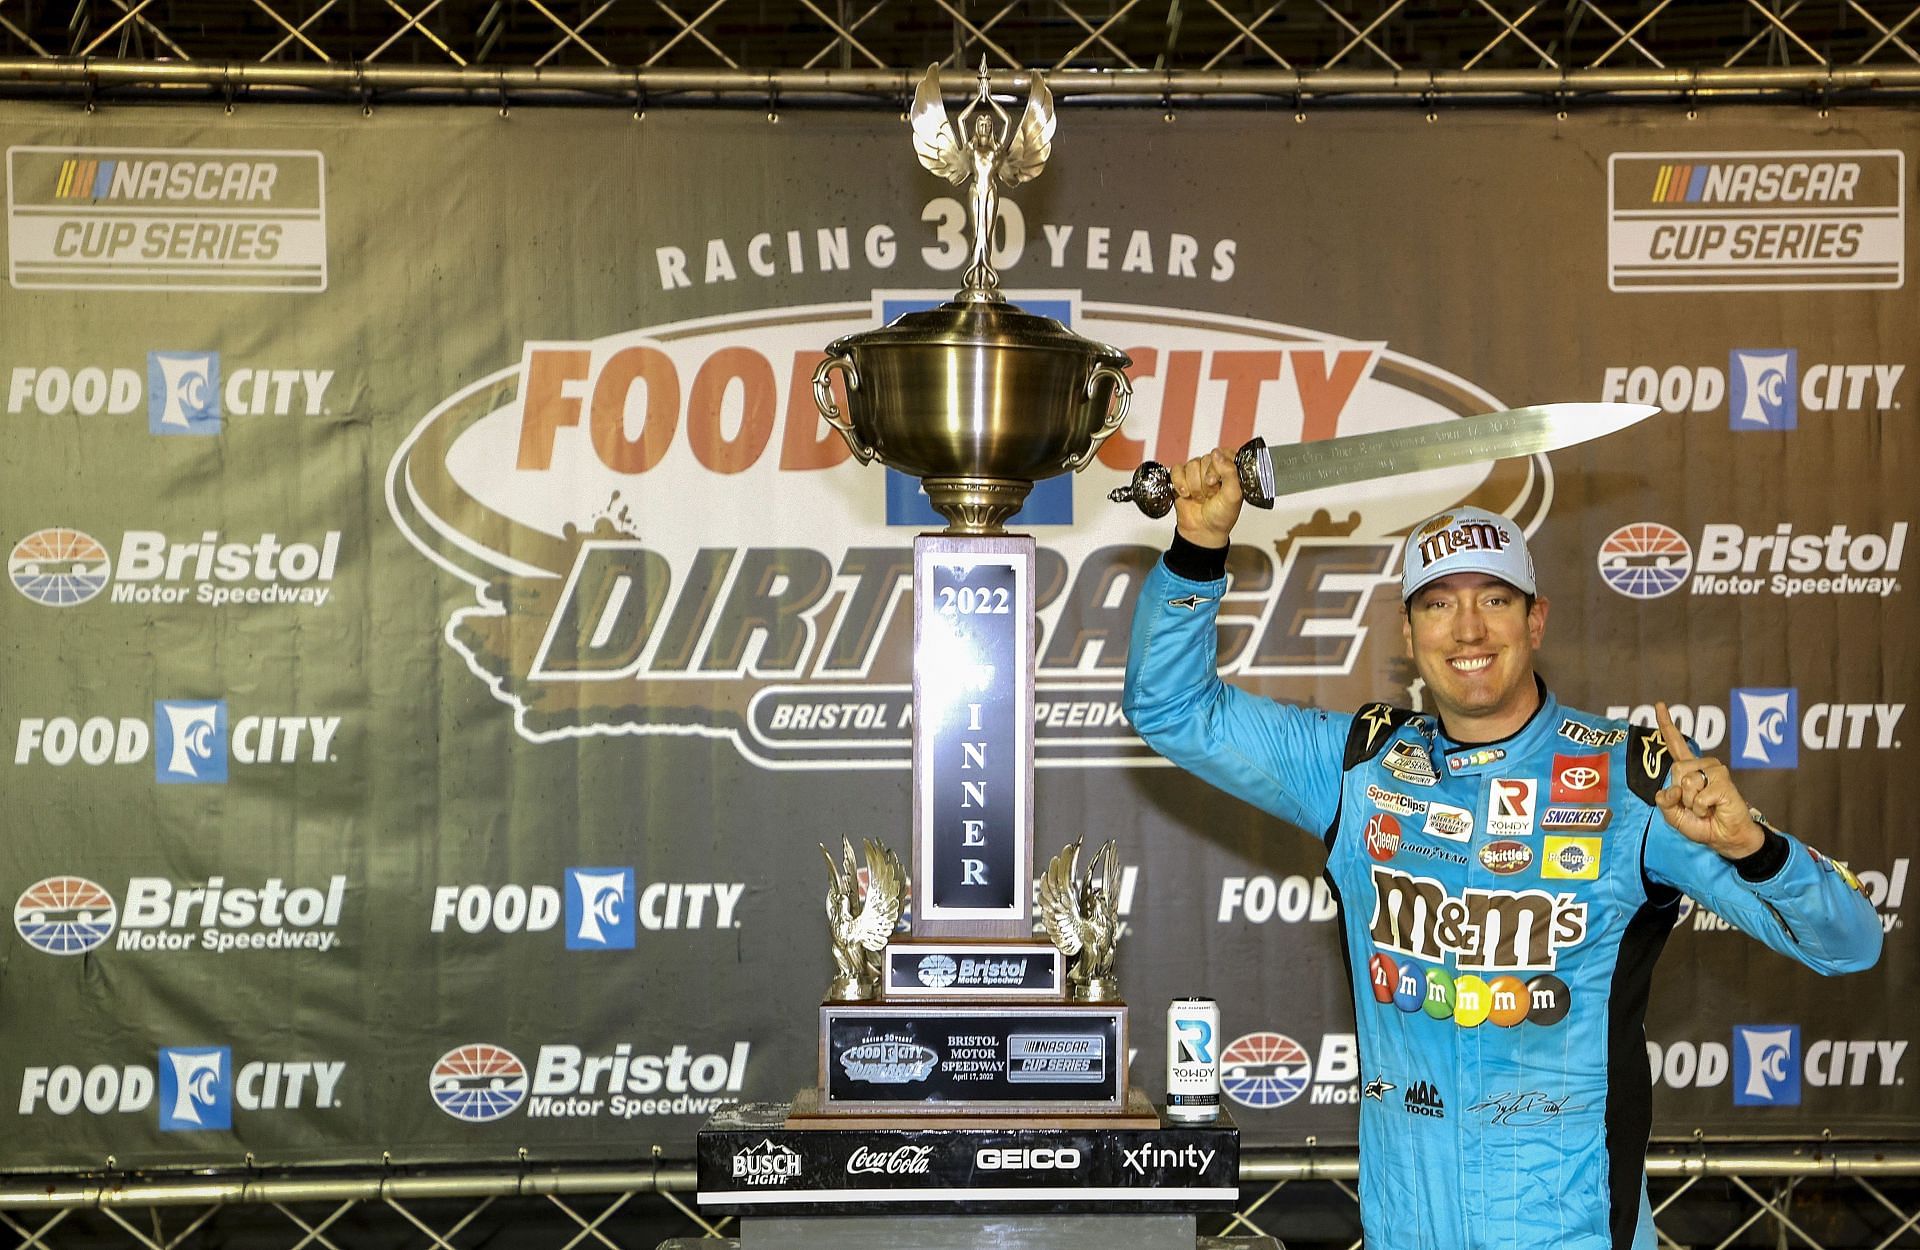 Kyle Busch celebrates in victory lane after winning the 2022 NASCAR Cup Series Food City Dirt Race at Bristol Motor Speedway in Tennessee. (Photo by Chris Graythen/Getty Images)